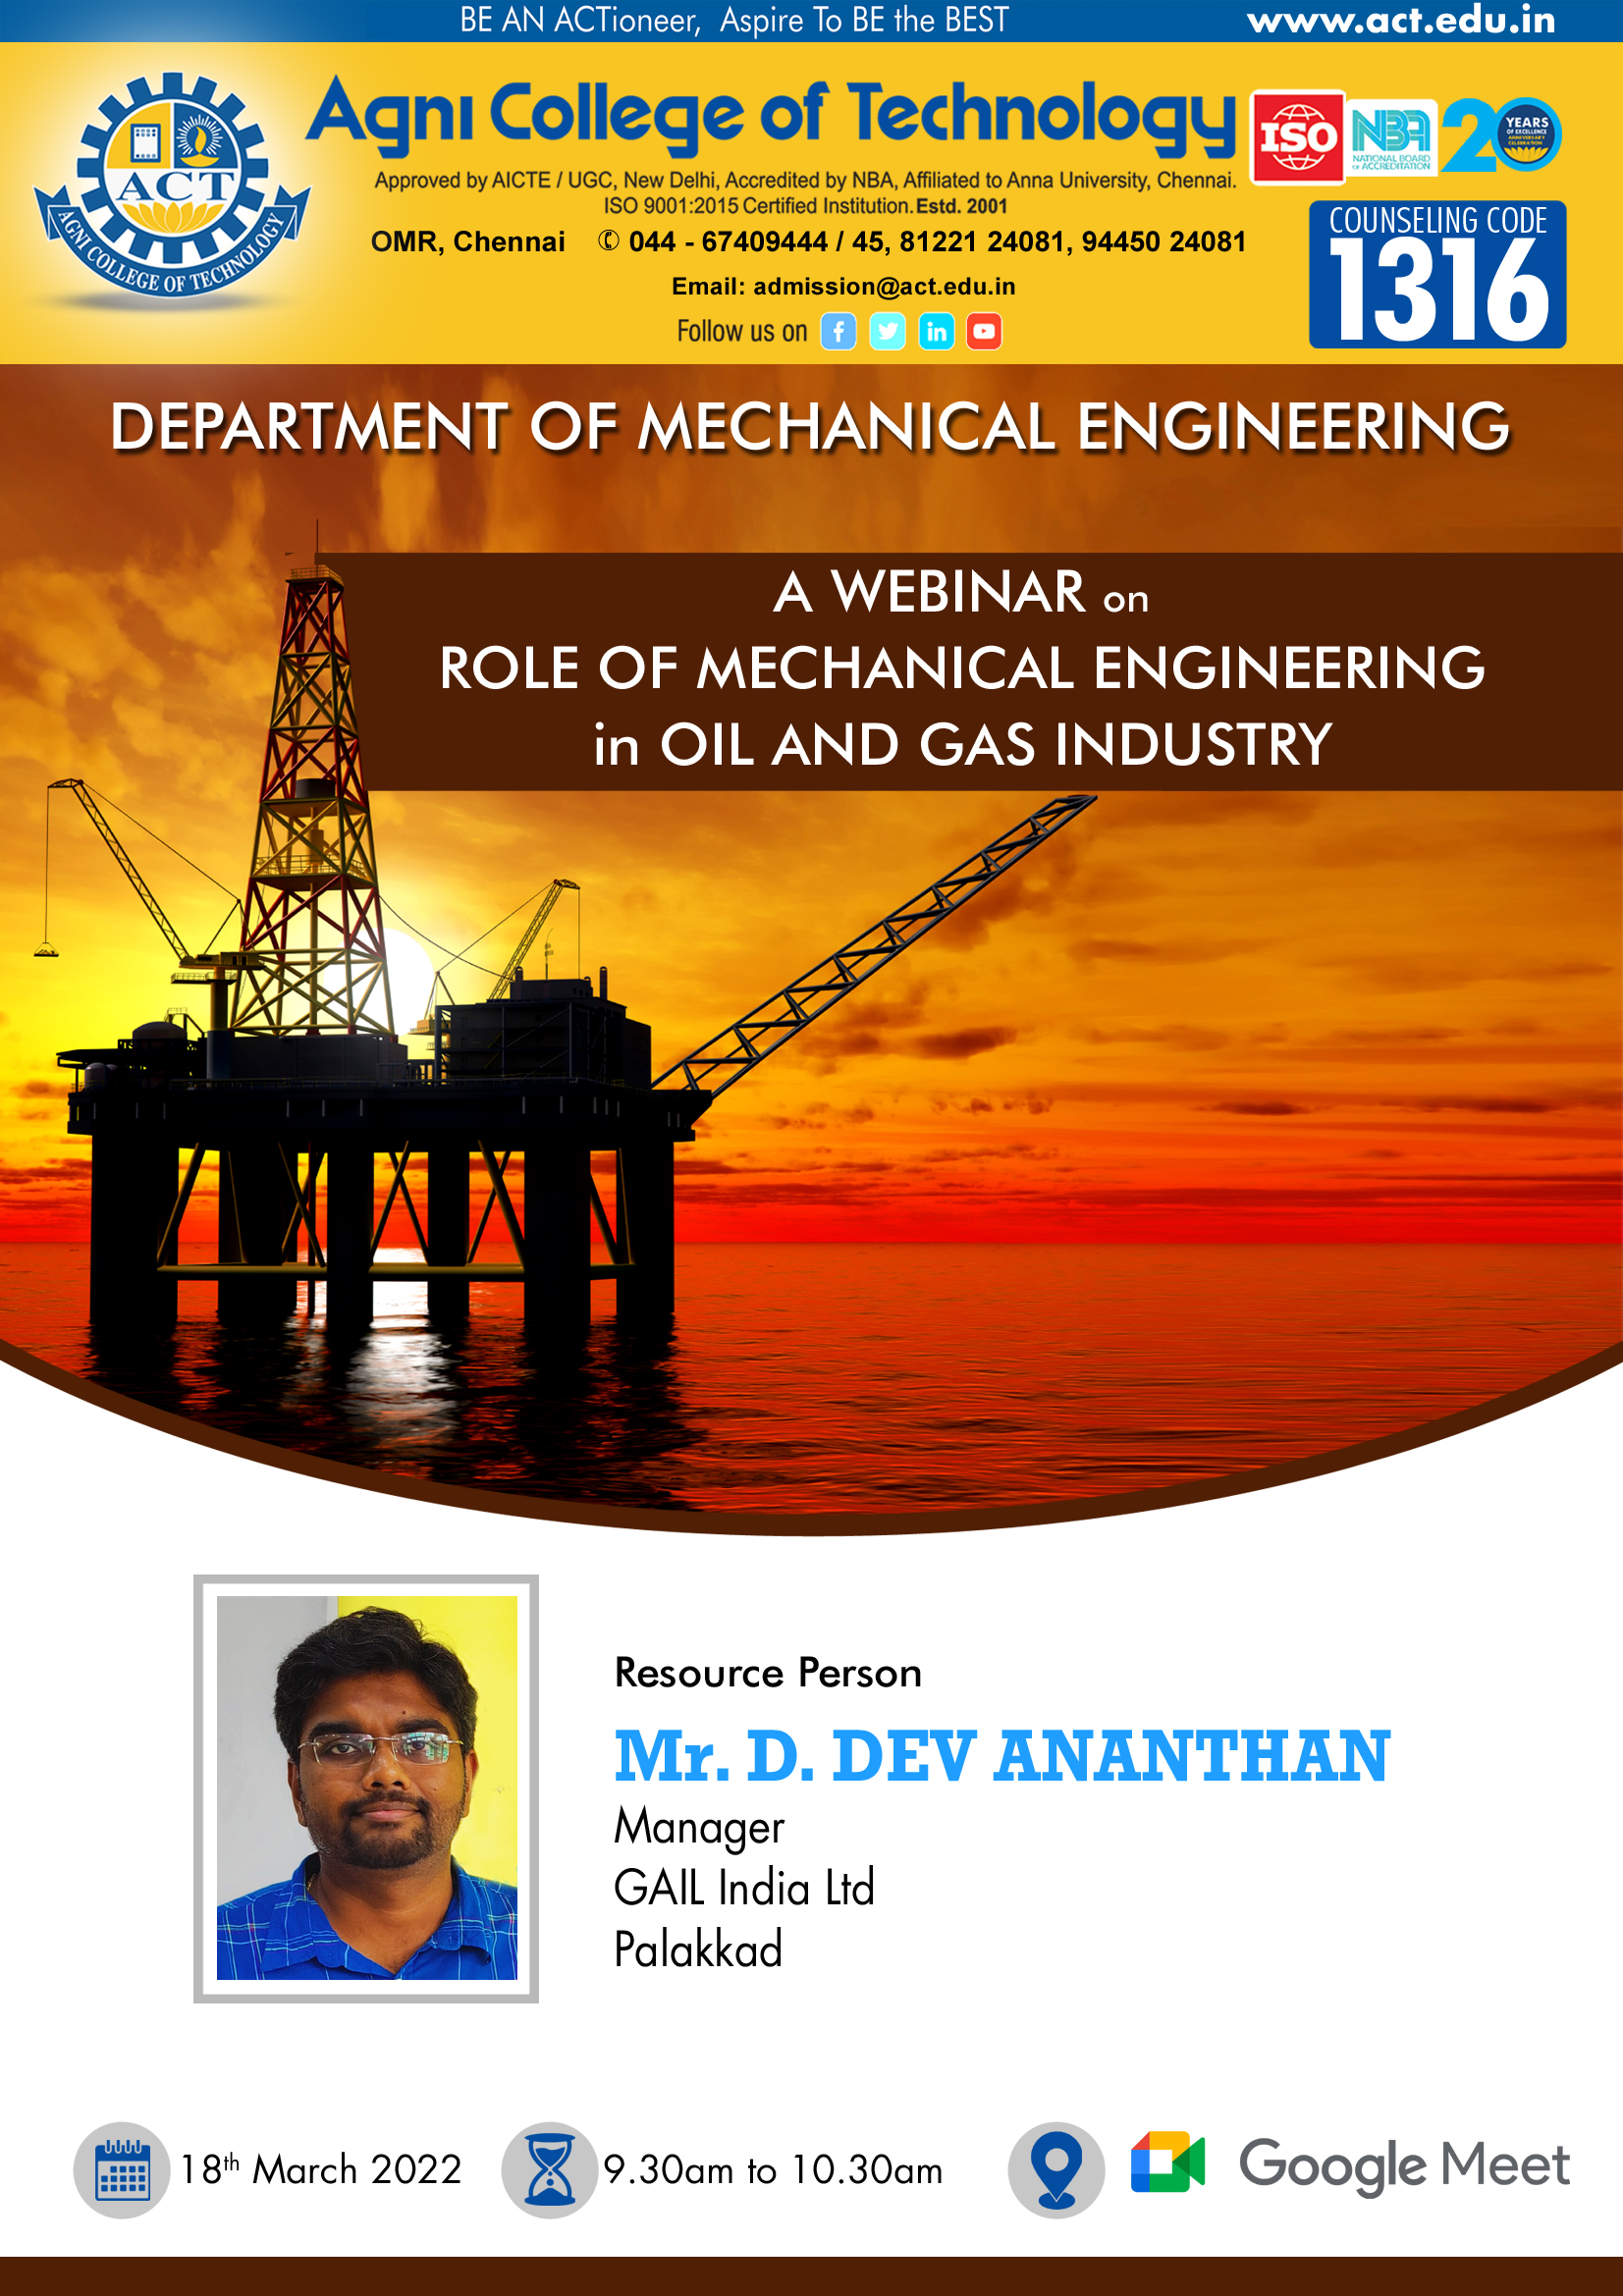 A Webinar on Role of Mechanical Engineering in Oil and Gas Industry